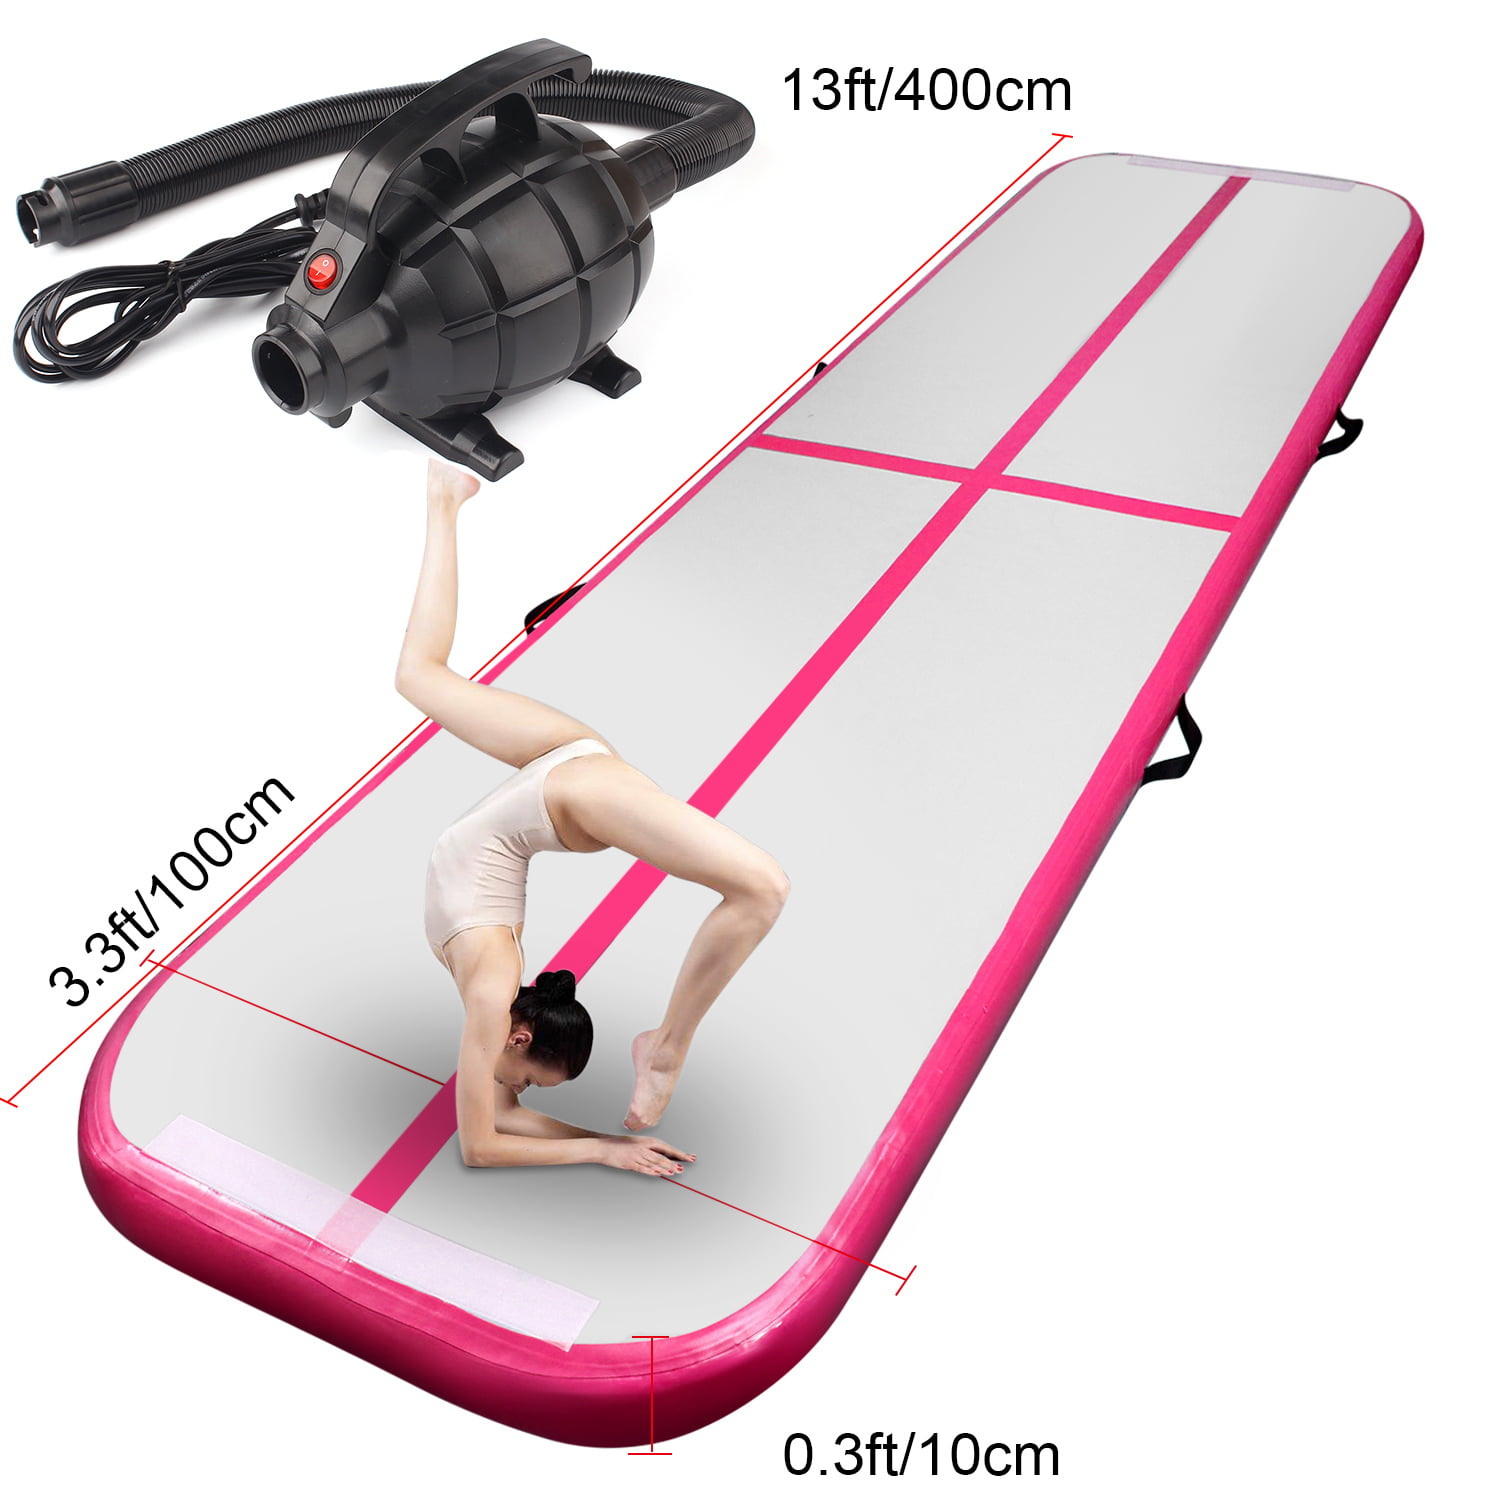 3x1x0.1m Inflatable Air Track Floor GYM Gymnastics Home Tumbling Mat With Pump 